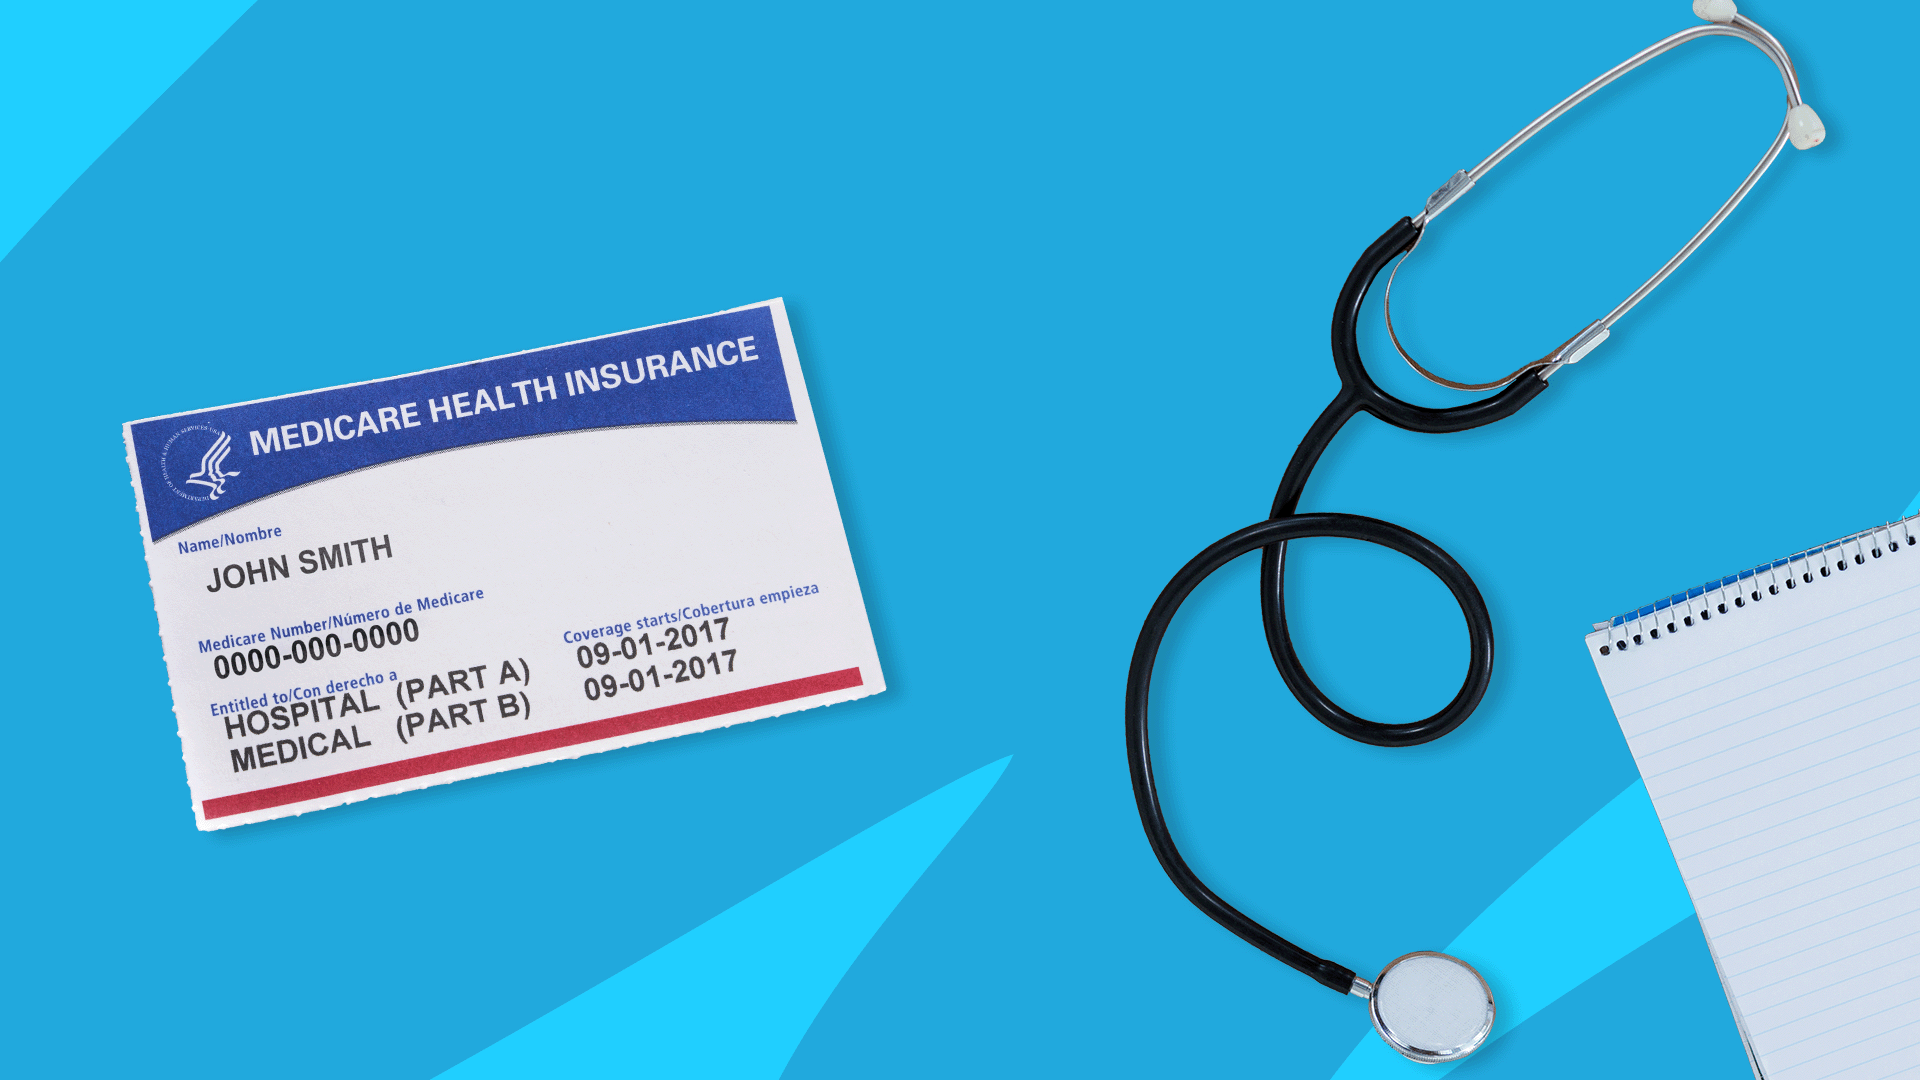 When does Medicare coverage start?